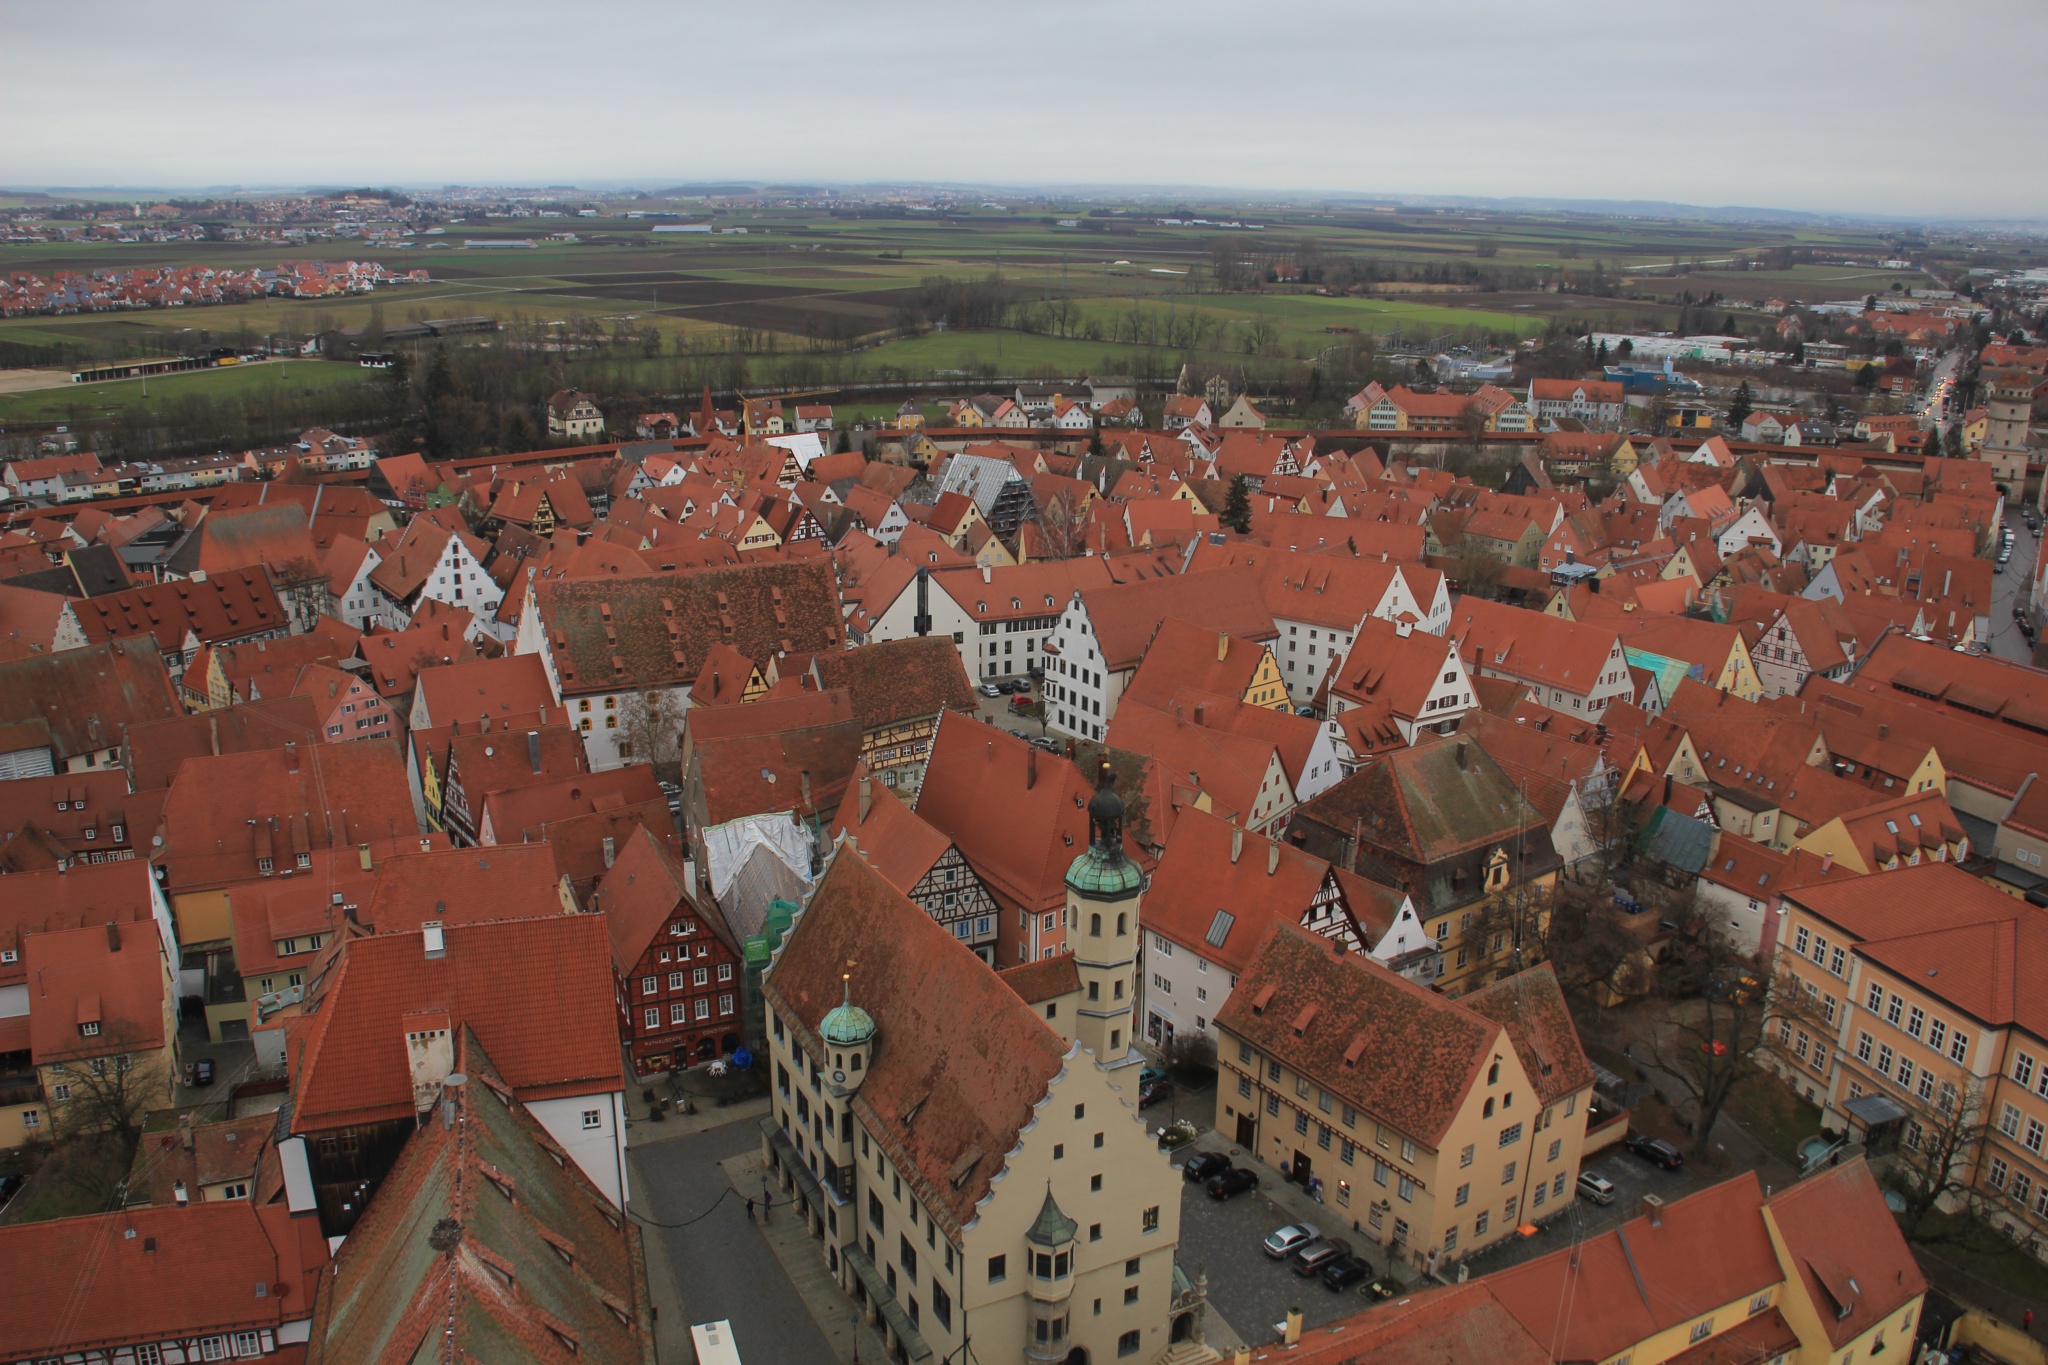 The view from the belltower of Saint George's Church in N&ouml;rdlingen, Germany is the same one seen at the end of the 1971 movie musical, Willy Wonka and the Chocolate Factory.